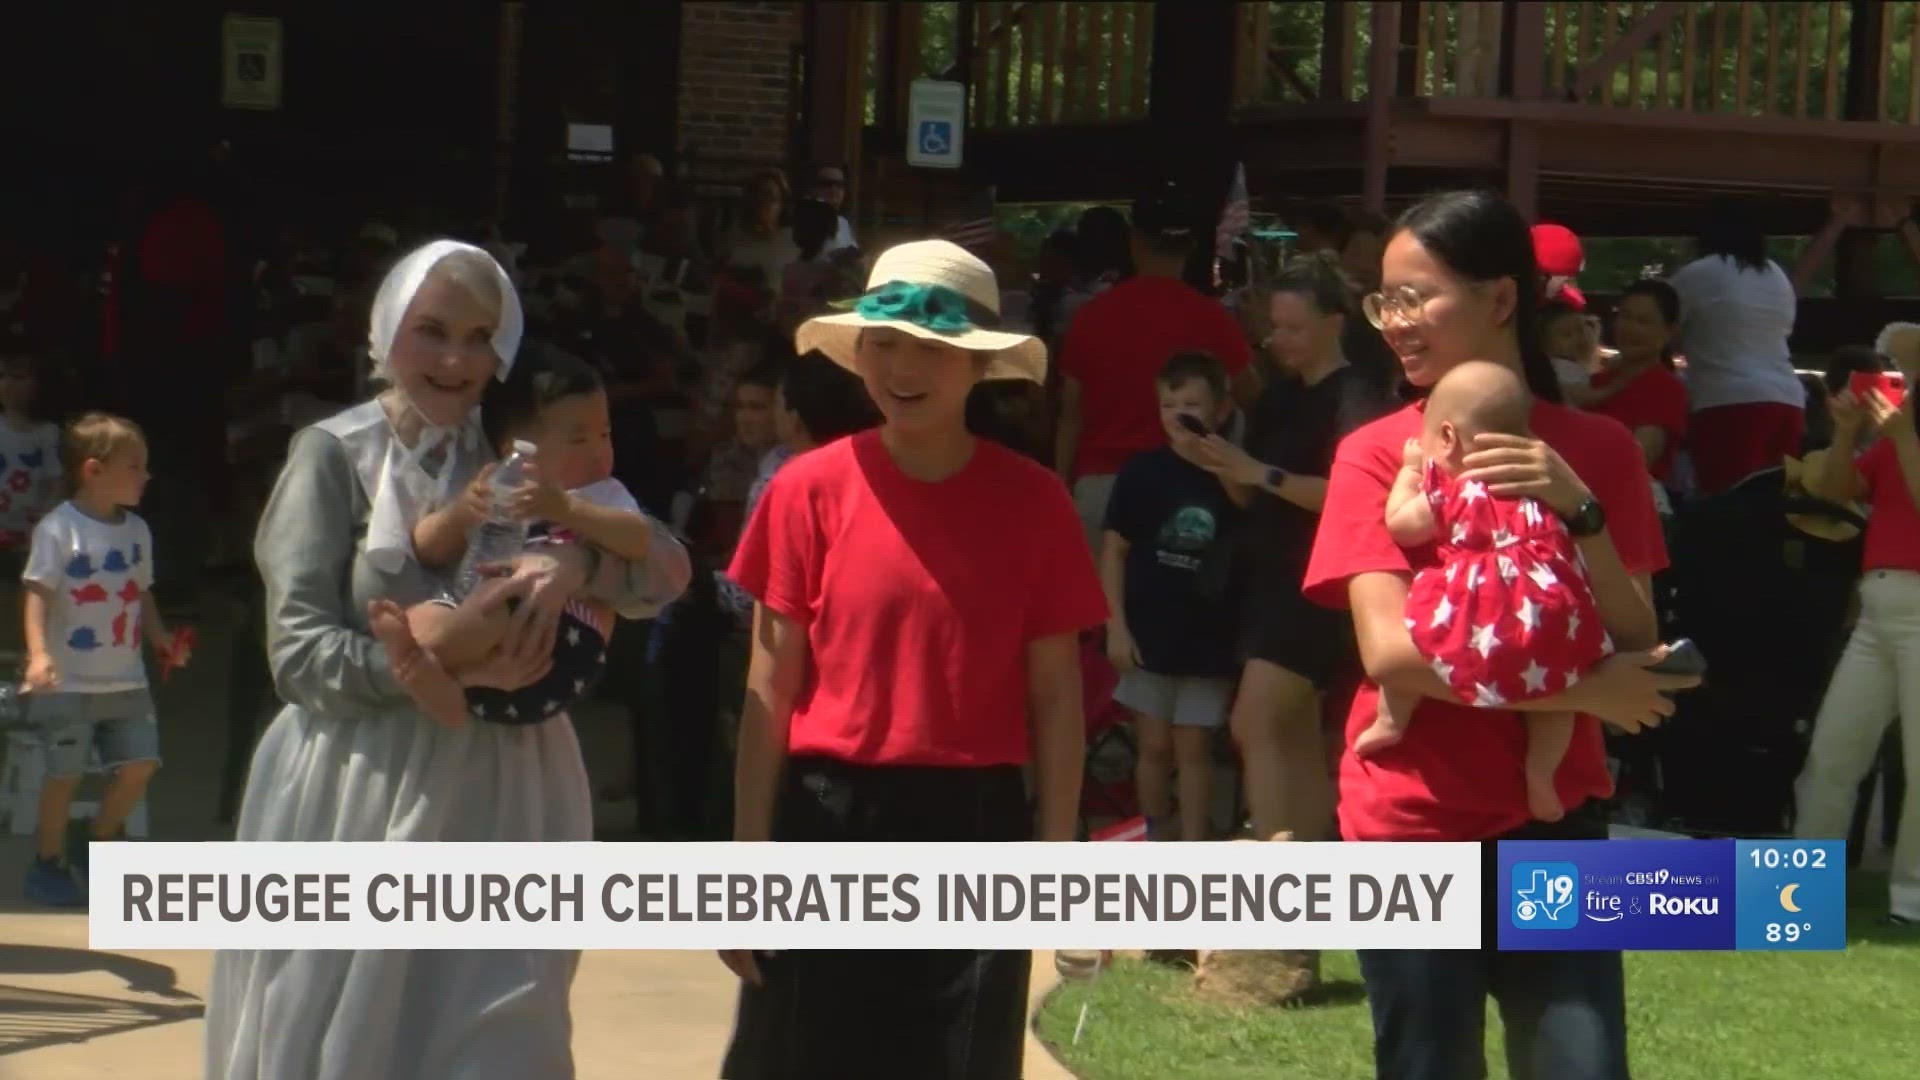 The congregation who fled China due to religious persecution were invited to an patriotic parade at a Tyler school.